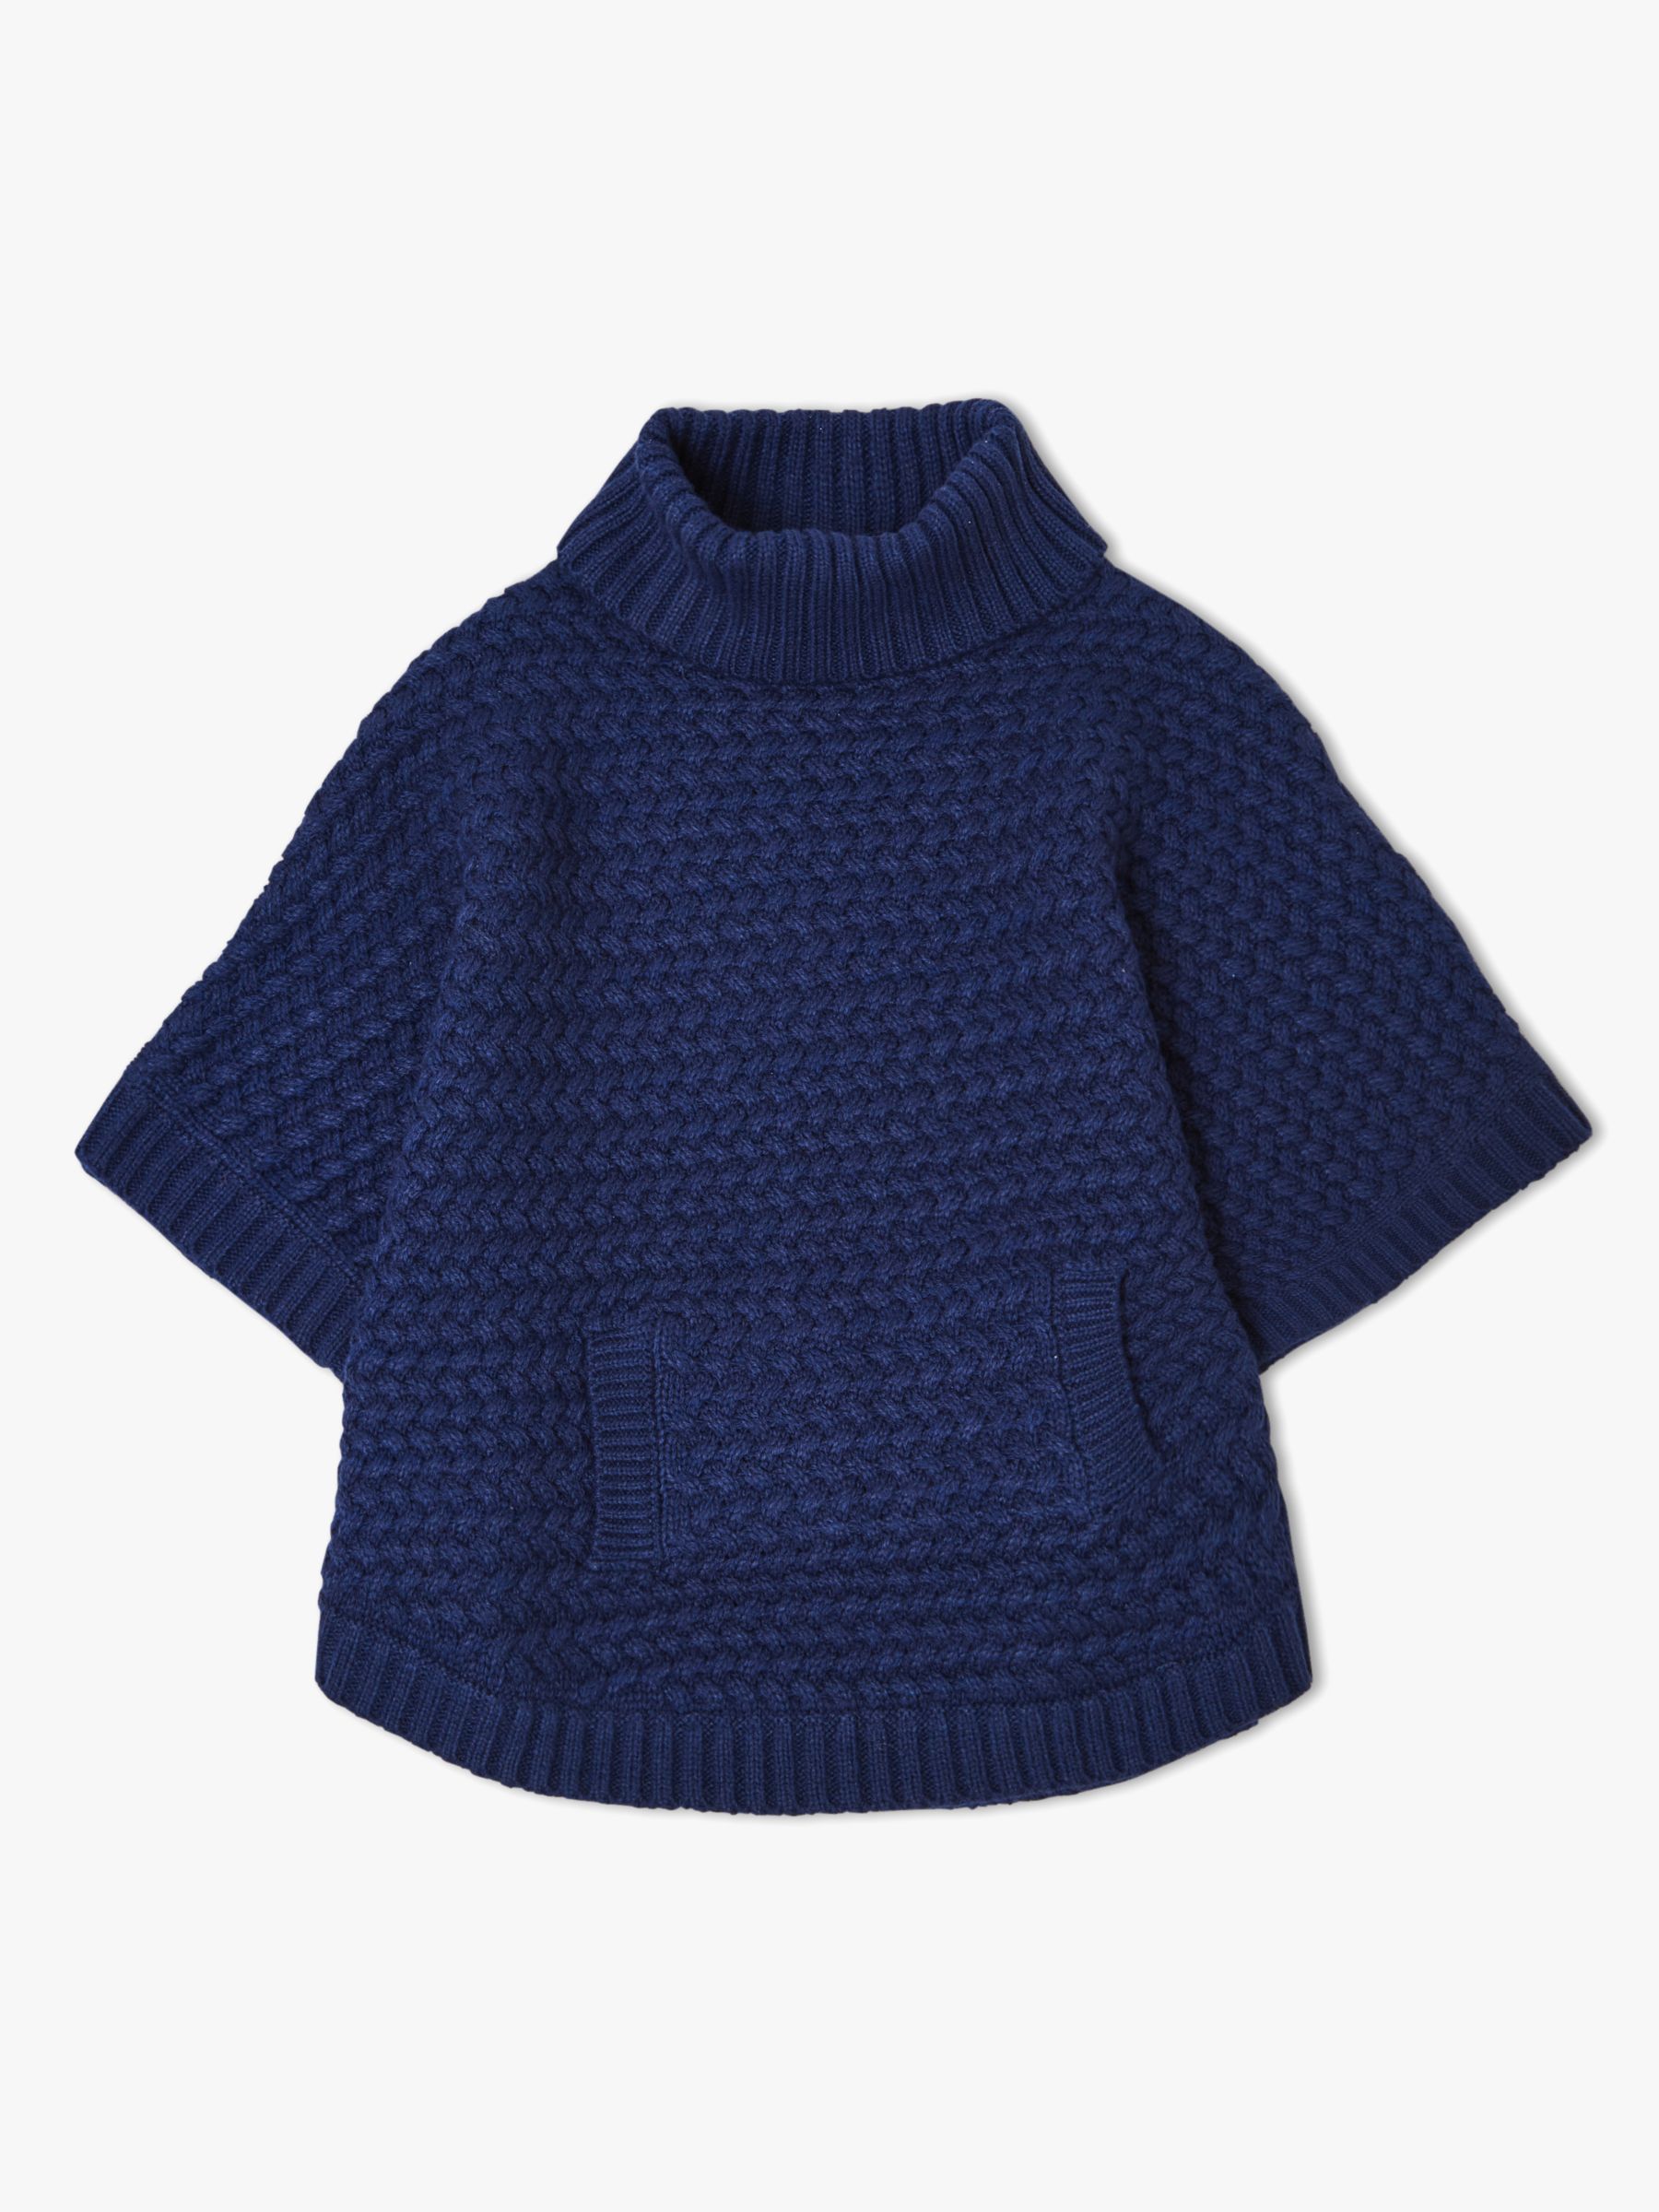 John Lewis & Partners Girls' Knitted Poncho, Navy